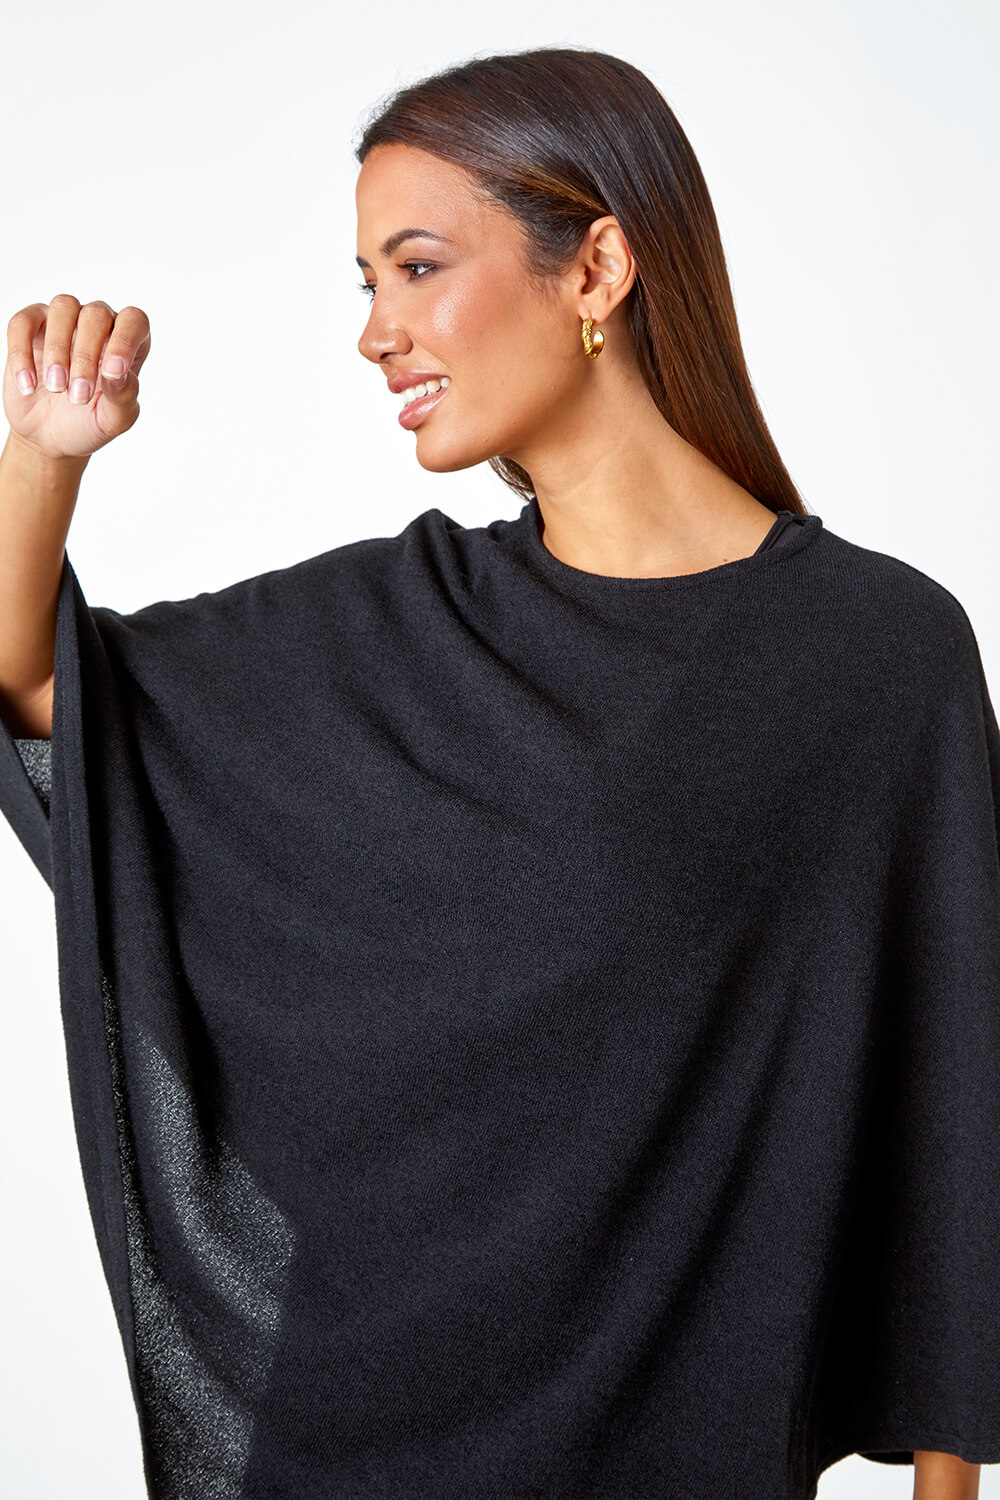 Black Marl Overlay Stretch Top, Image 4 of 5